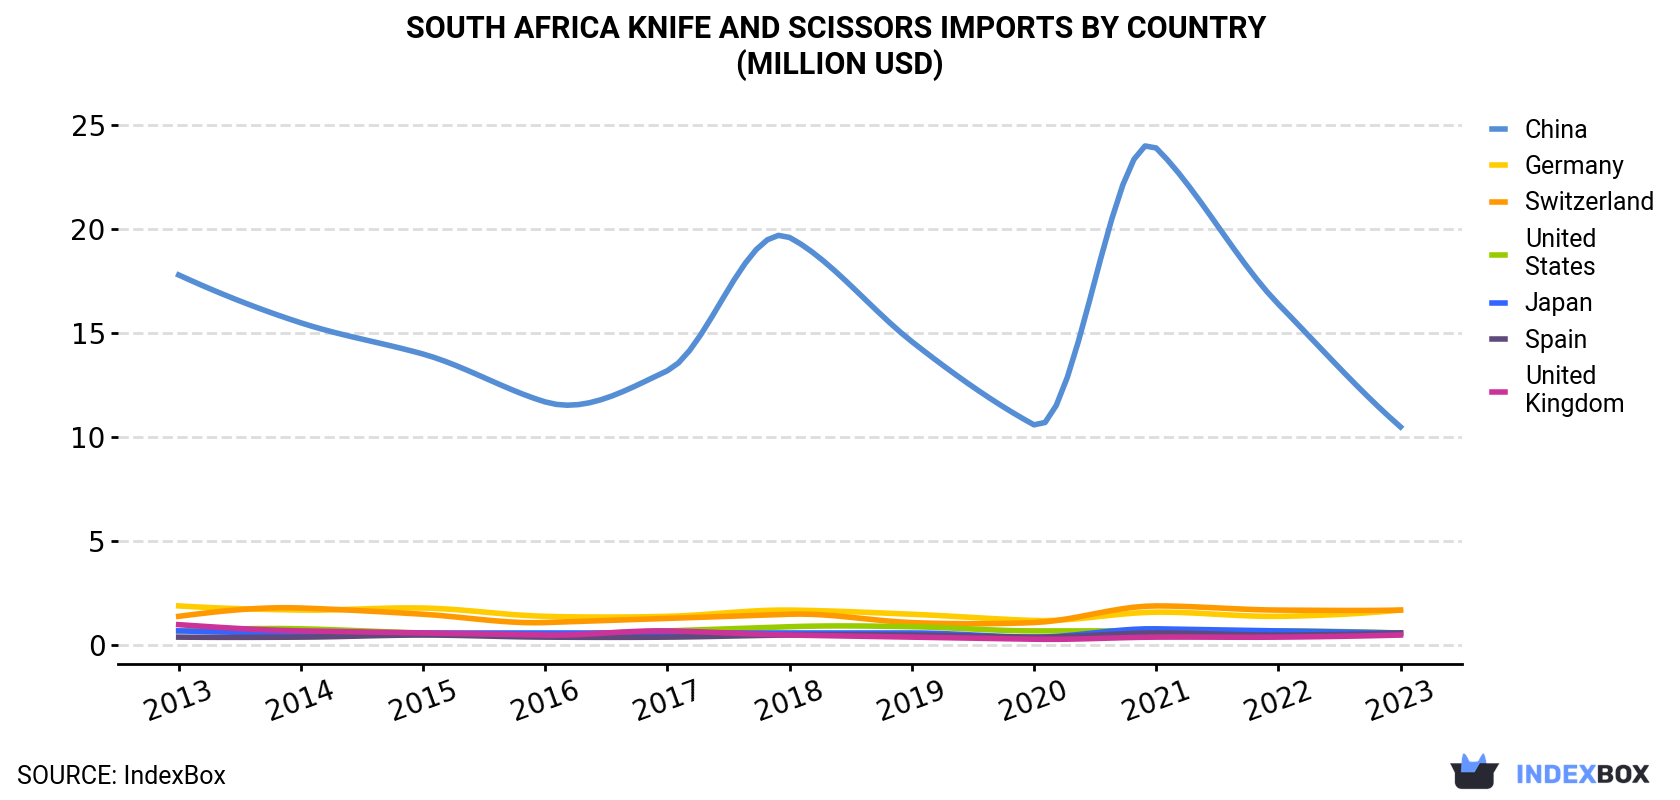 South Africa Knife And Scissors Imports By Country (Million USD)